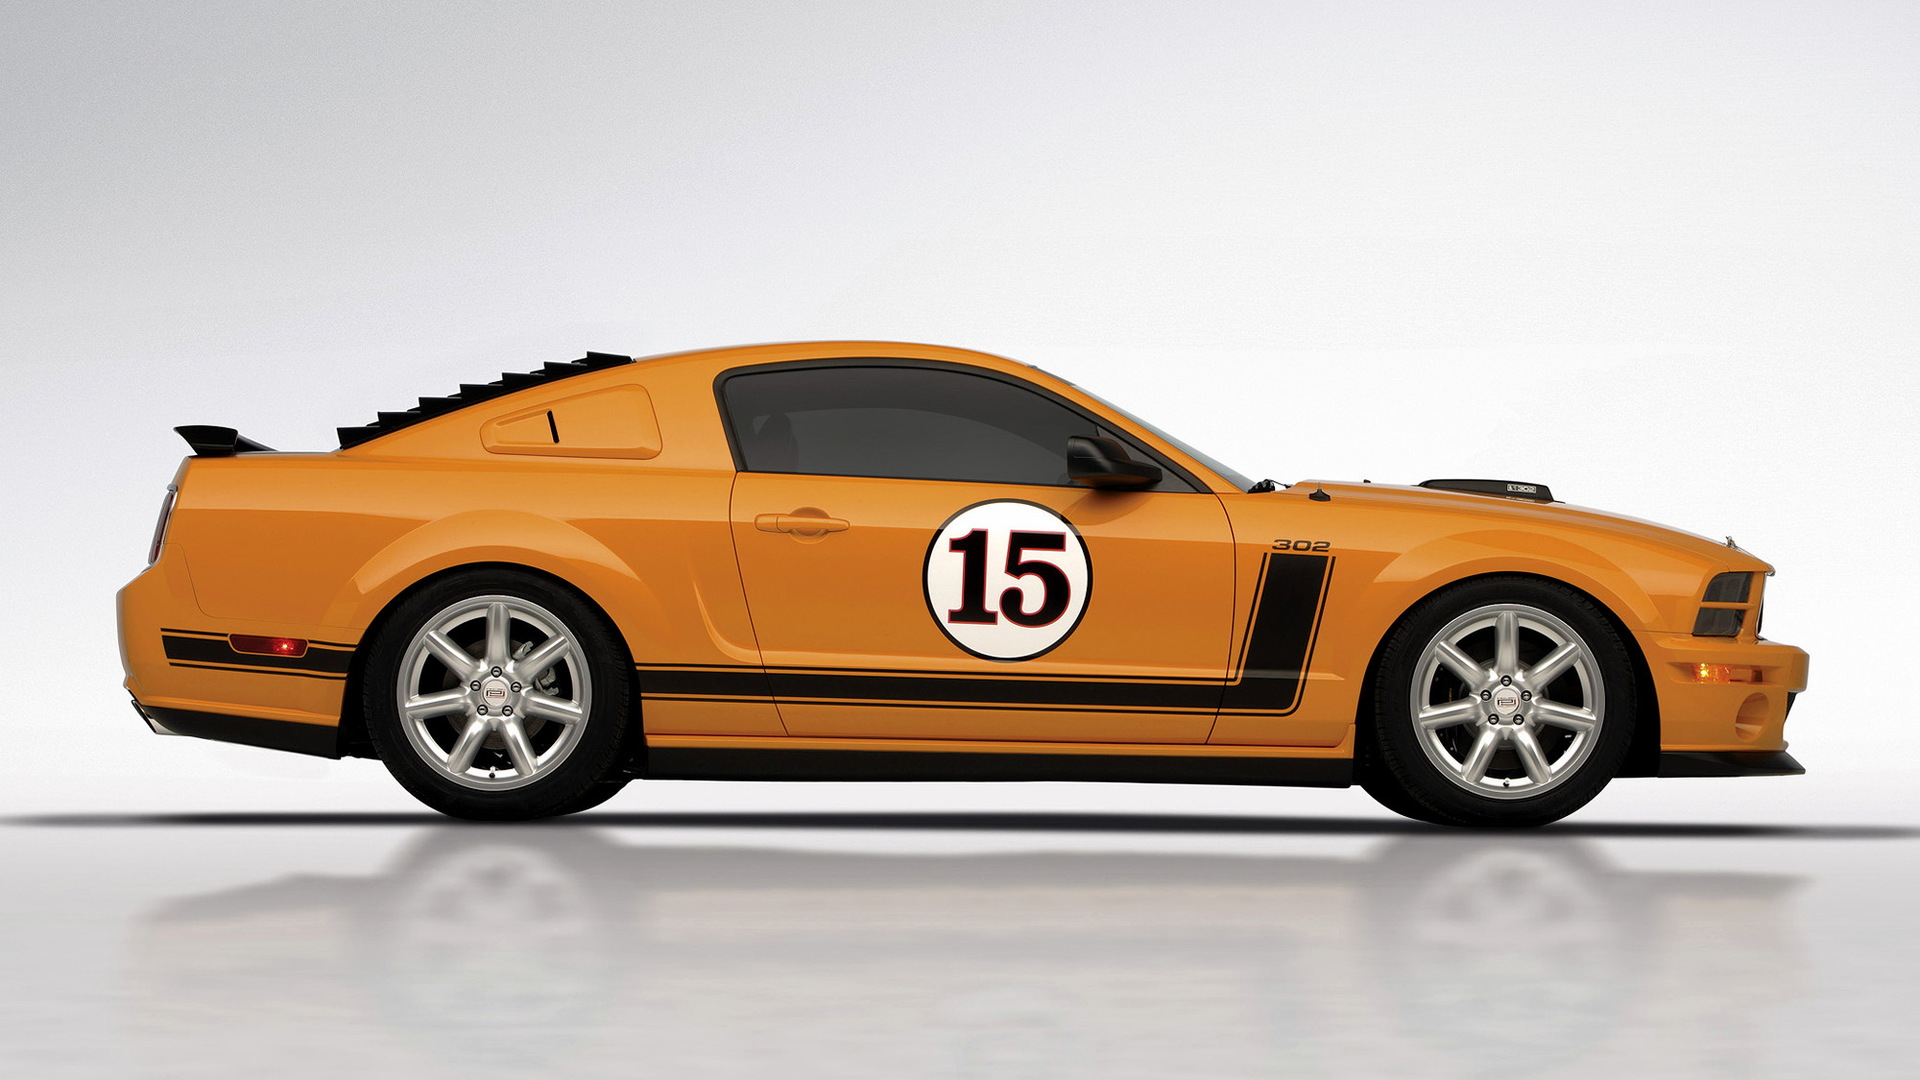 2006 Ford Mustang Saleen S302 Parnelli Jones Limited Edition Hd Wallpaper Background Image 1920x1080